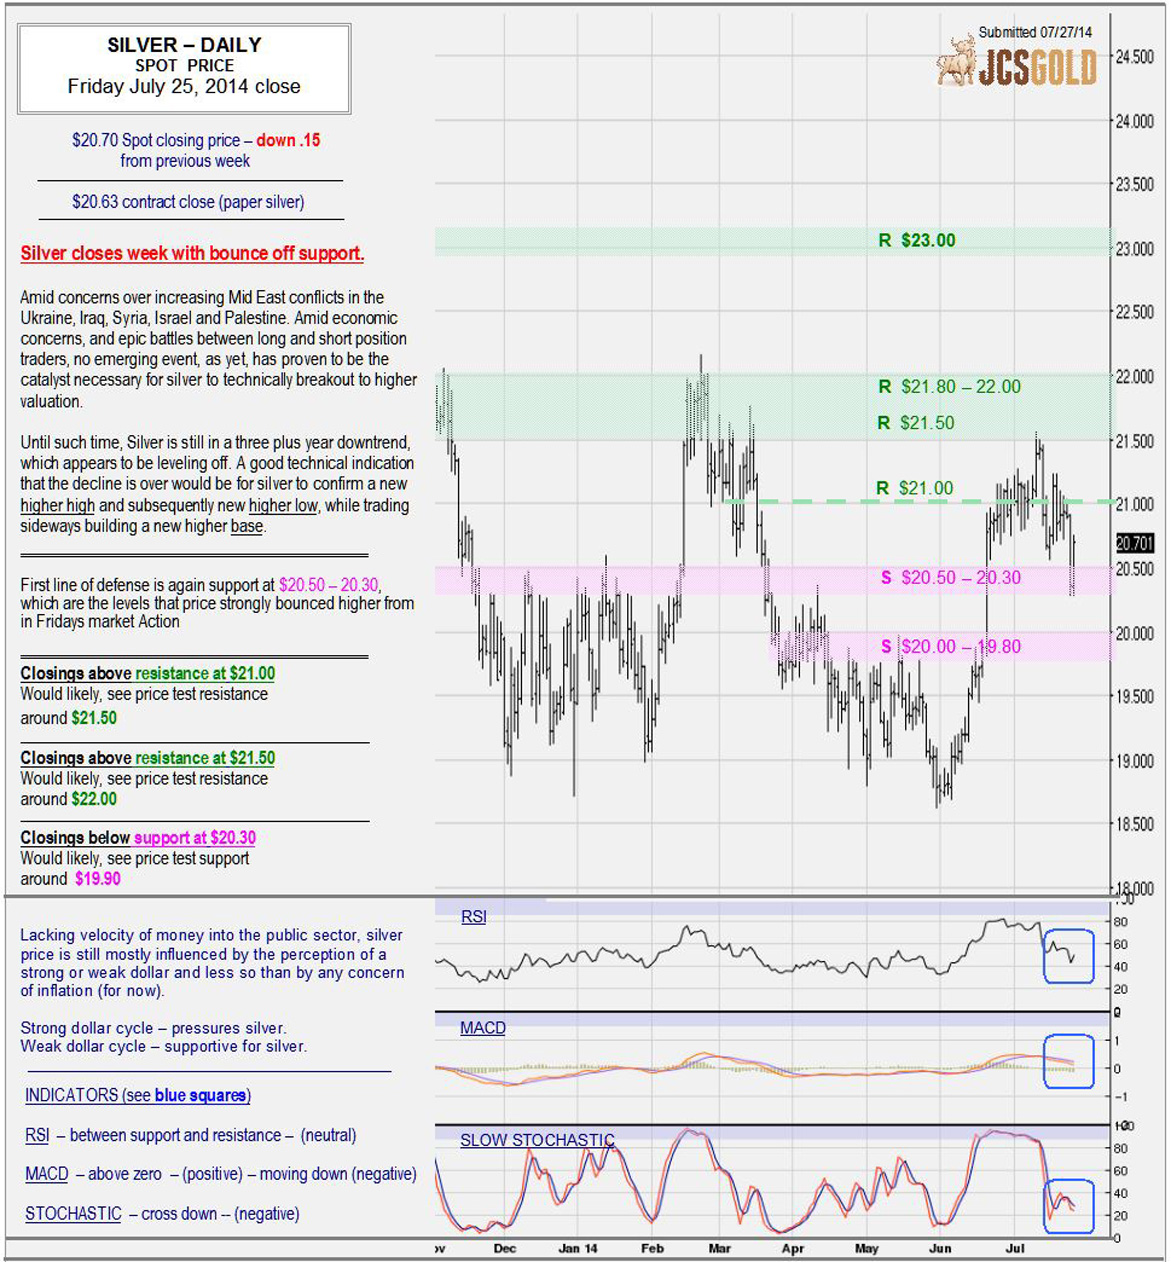 July 25, 2014 chart & commentary